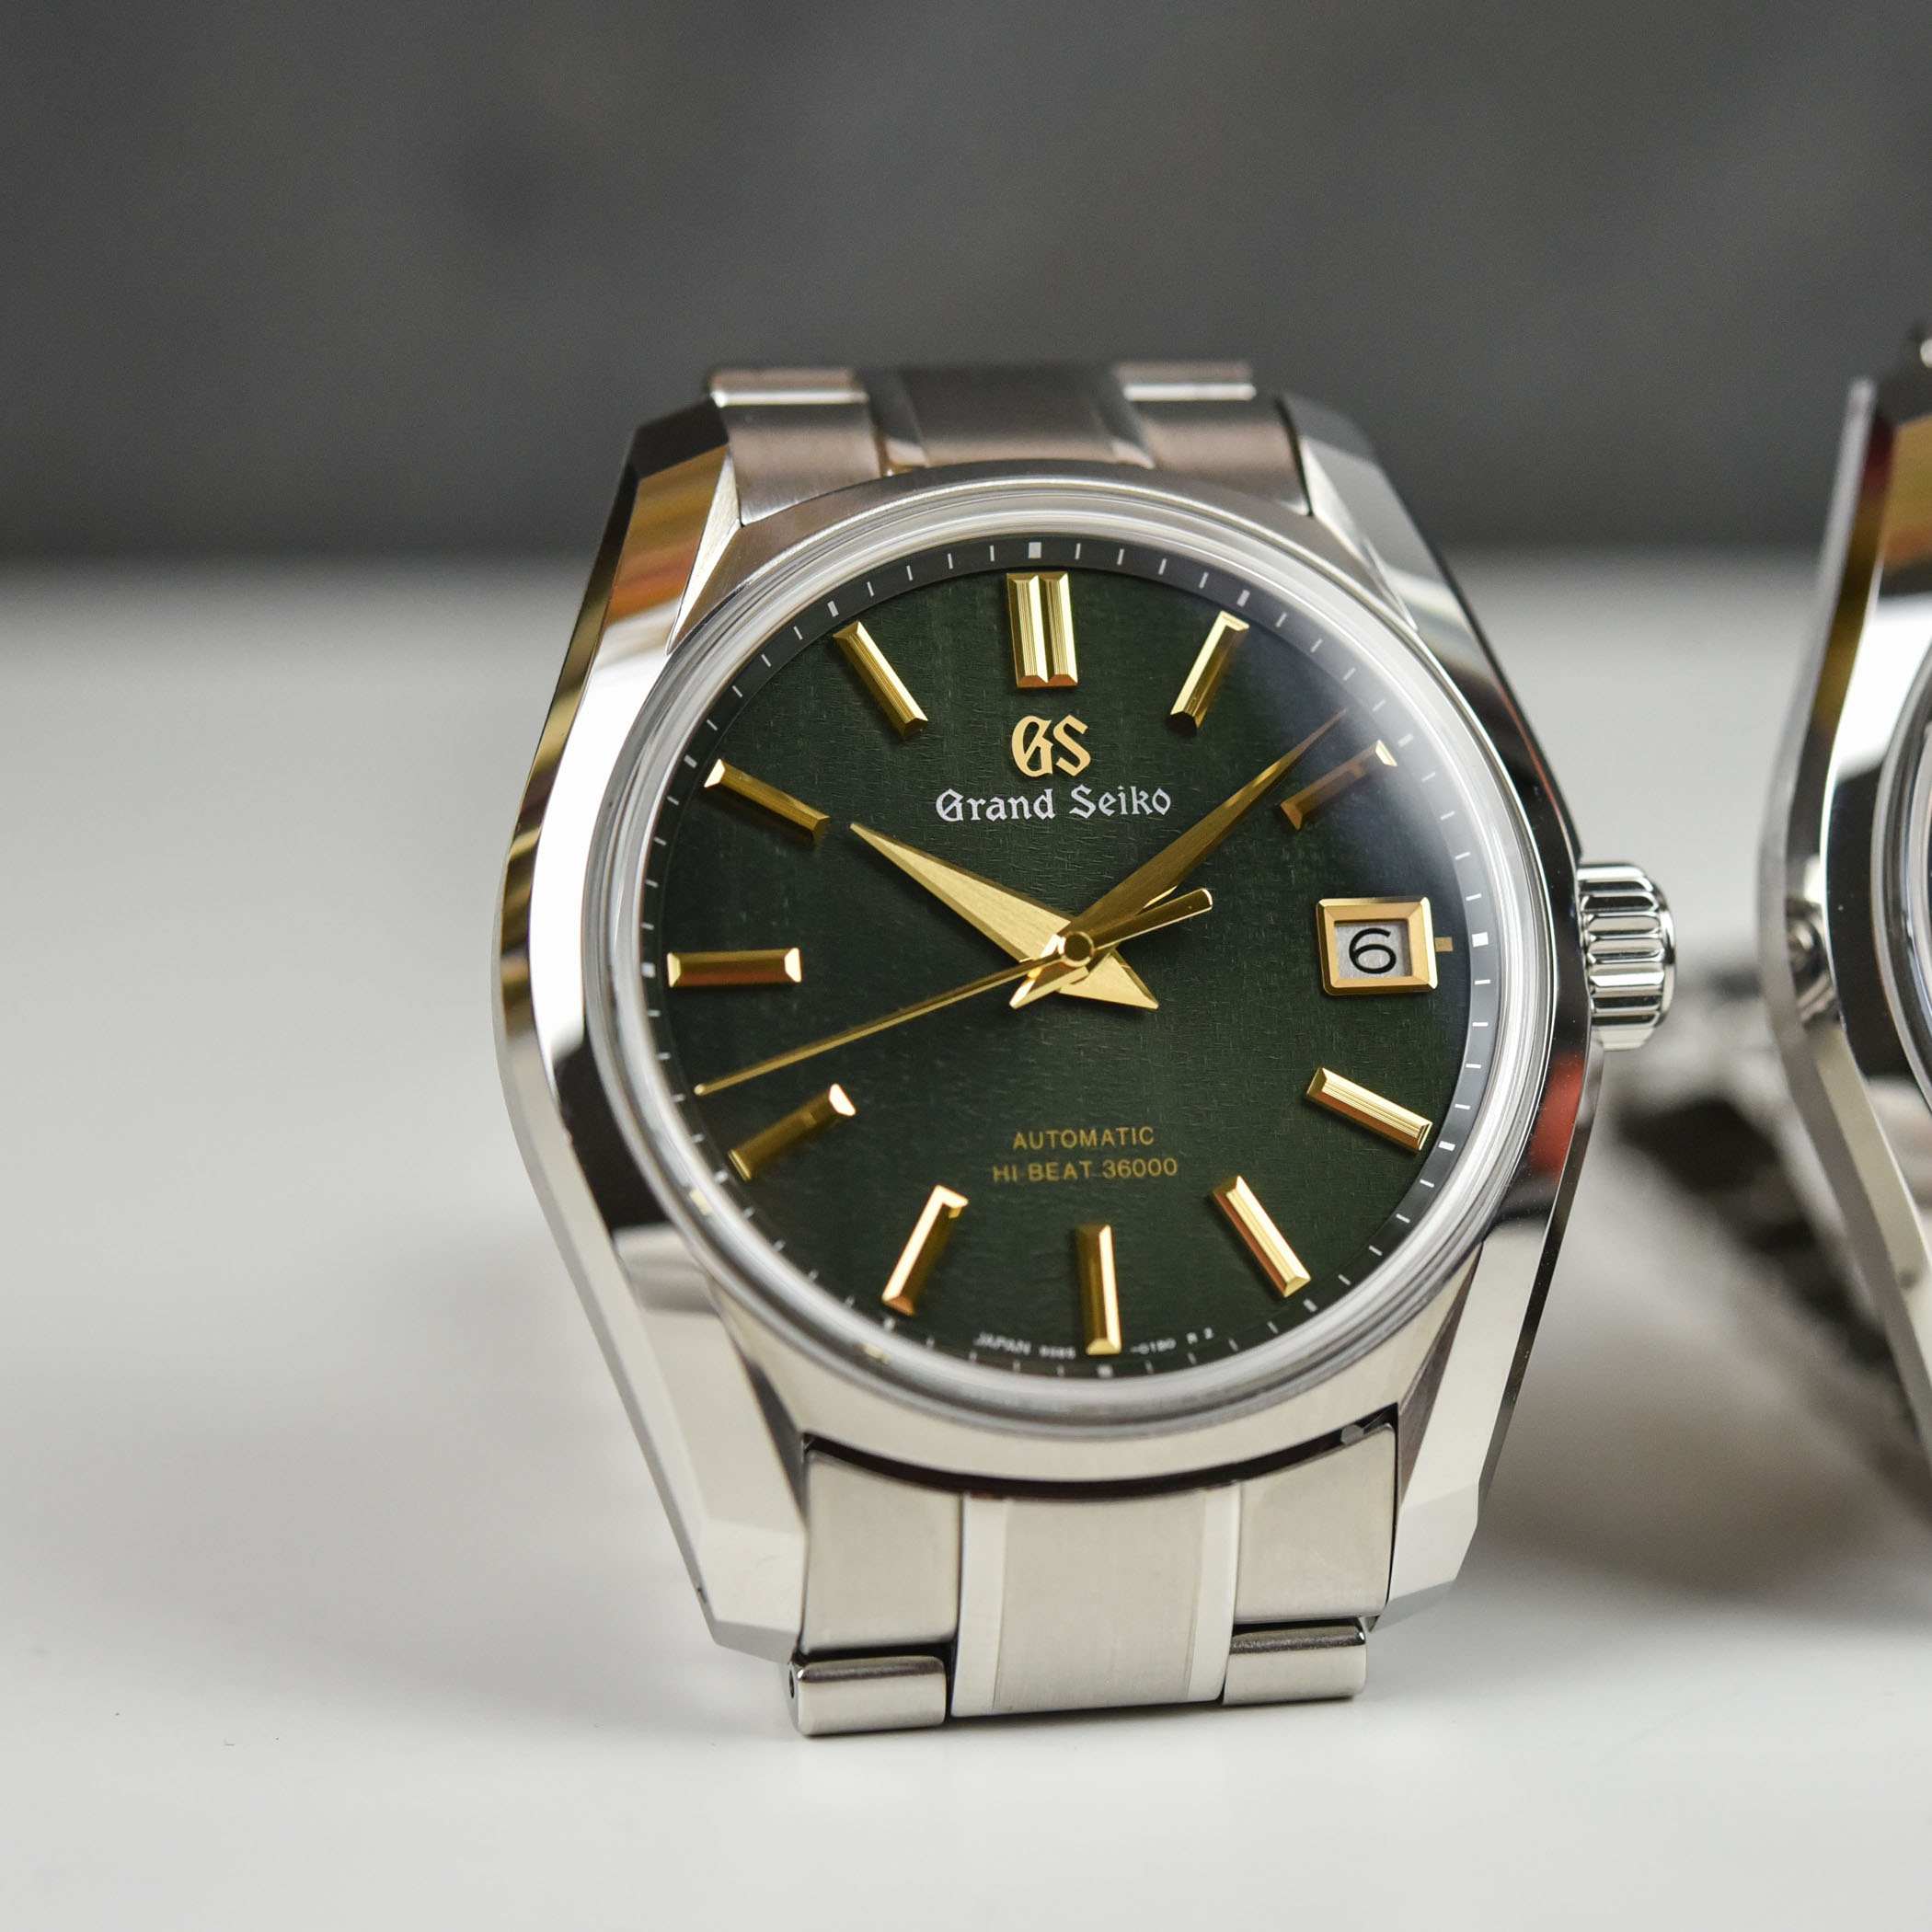 Grand Seiko 4 Seasons Collection Now Available WorldWide - hi beat SBGH271